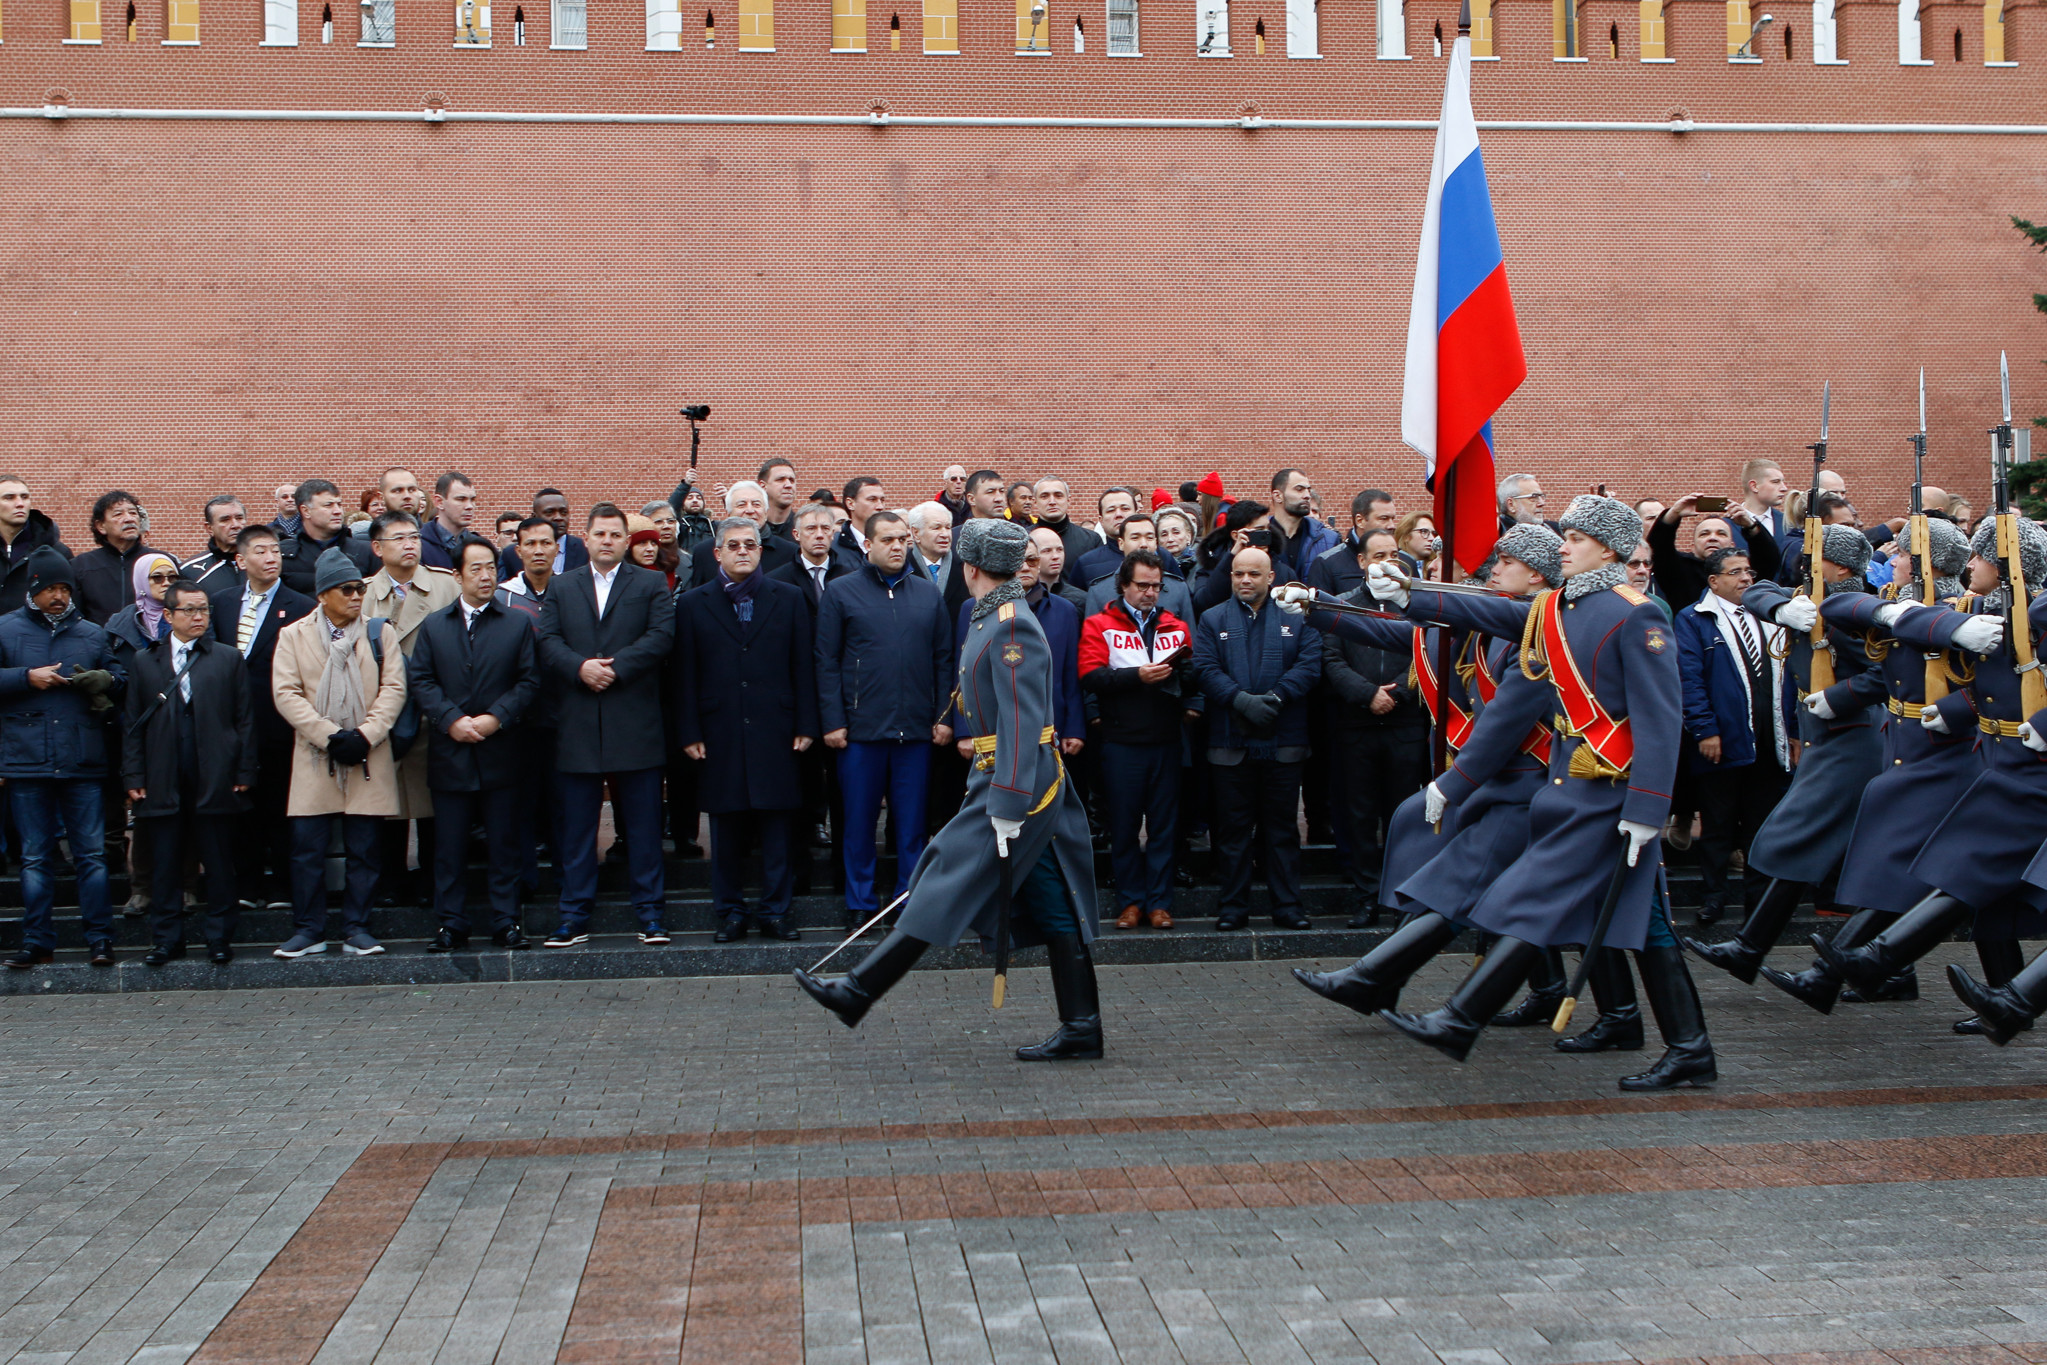 Delegates from a number of countries attending the AIBA Congress in Moscow joined Interim President Gafur Rakhimov at the Kremlin to attend a ceremony today honouring Russian soldiers killed during World War Two ©Boxing Federation of Russia 